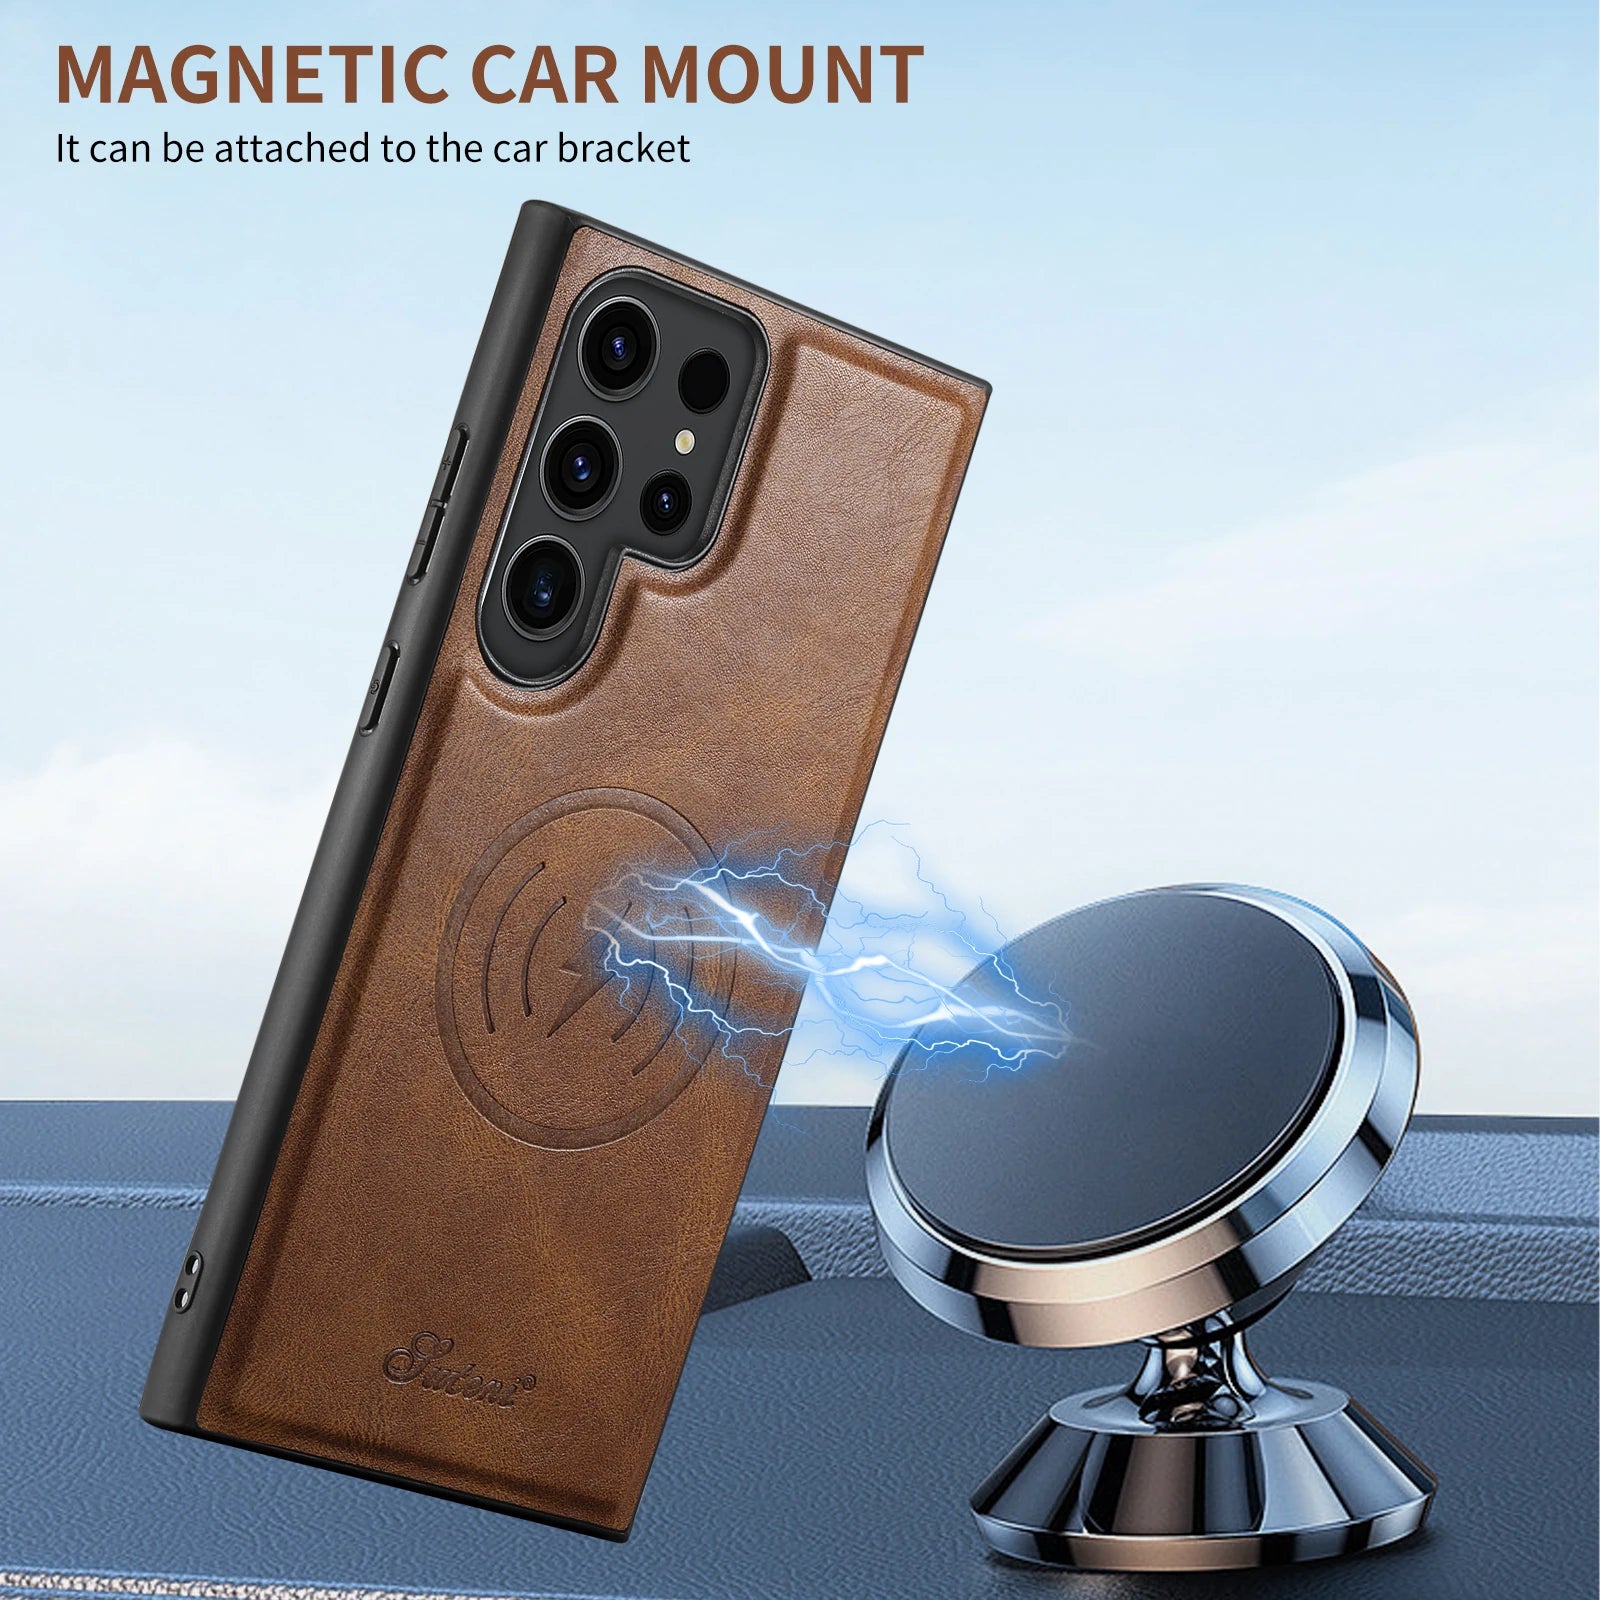 Card Holder Leather Magnetic Pocket Galaxy Note and S Case - DealJustDeal